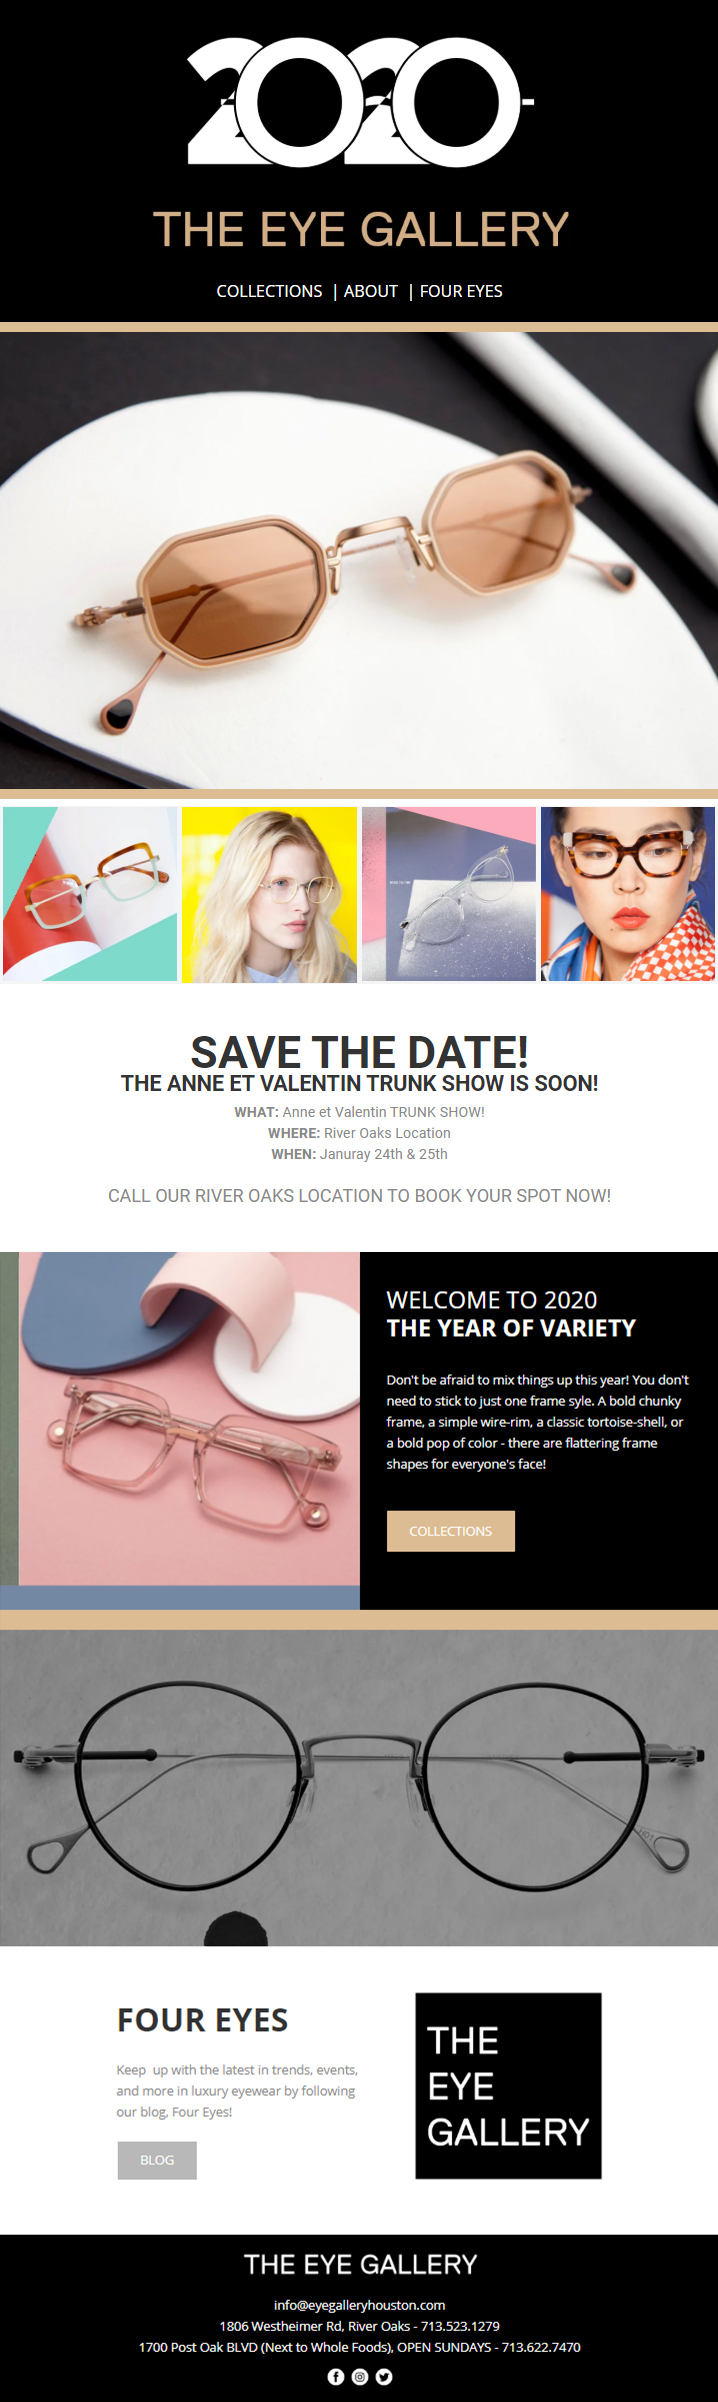 The Eye Gallery email design